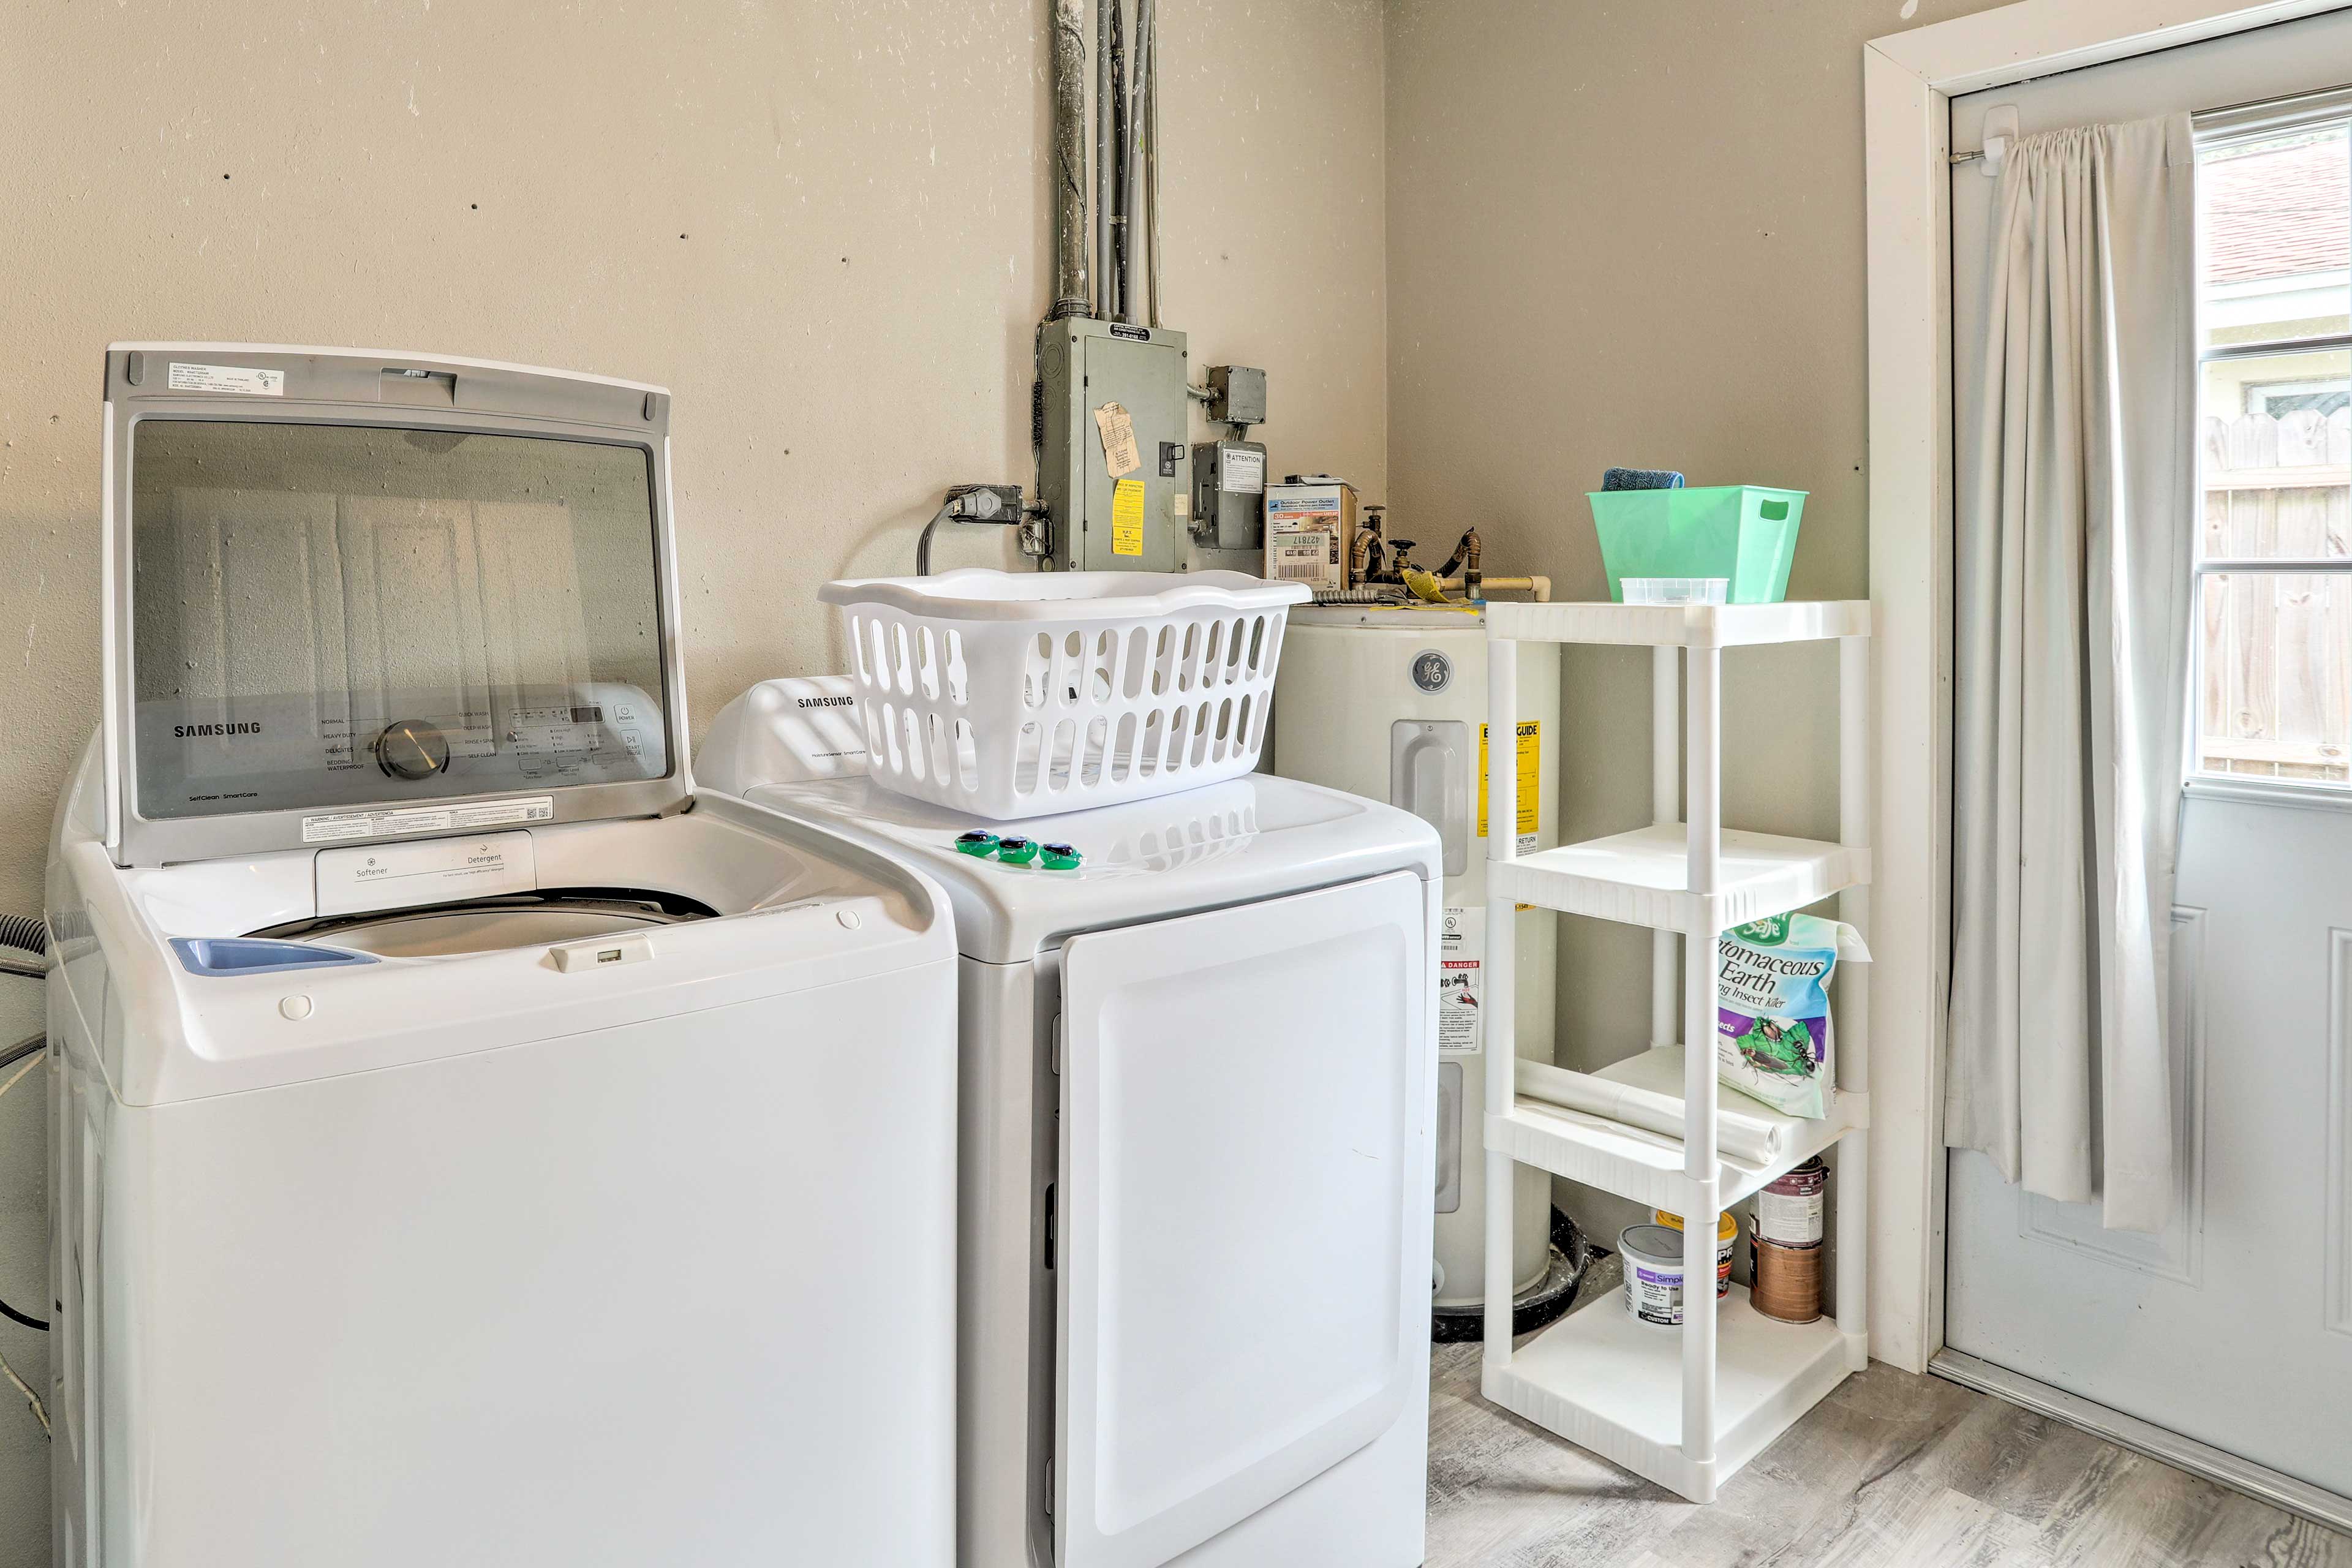 Laundry Room | Washer + Dryer | Iron/Board